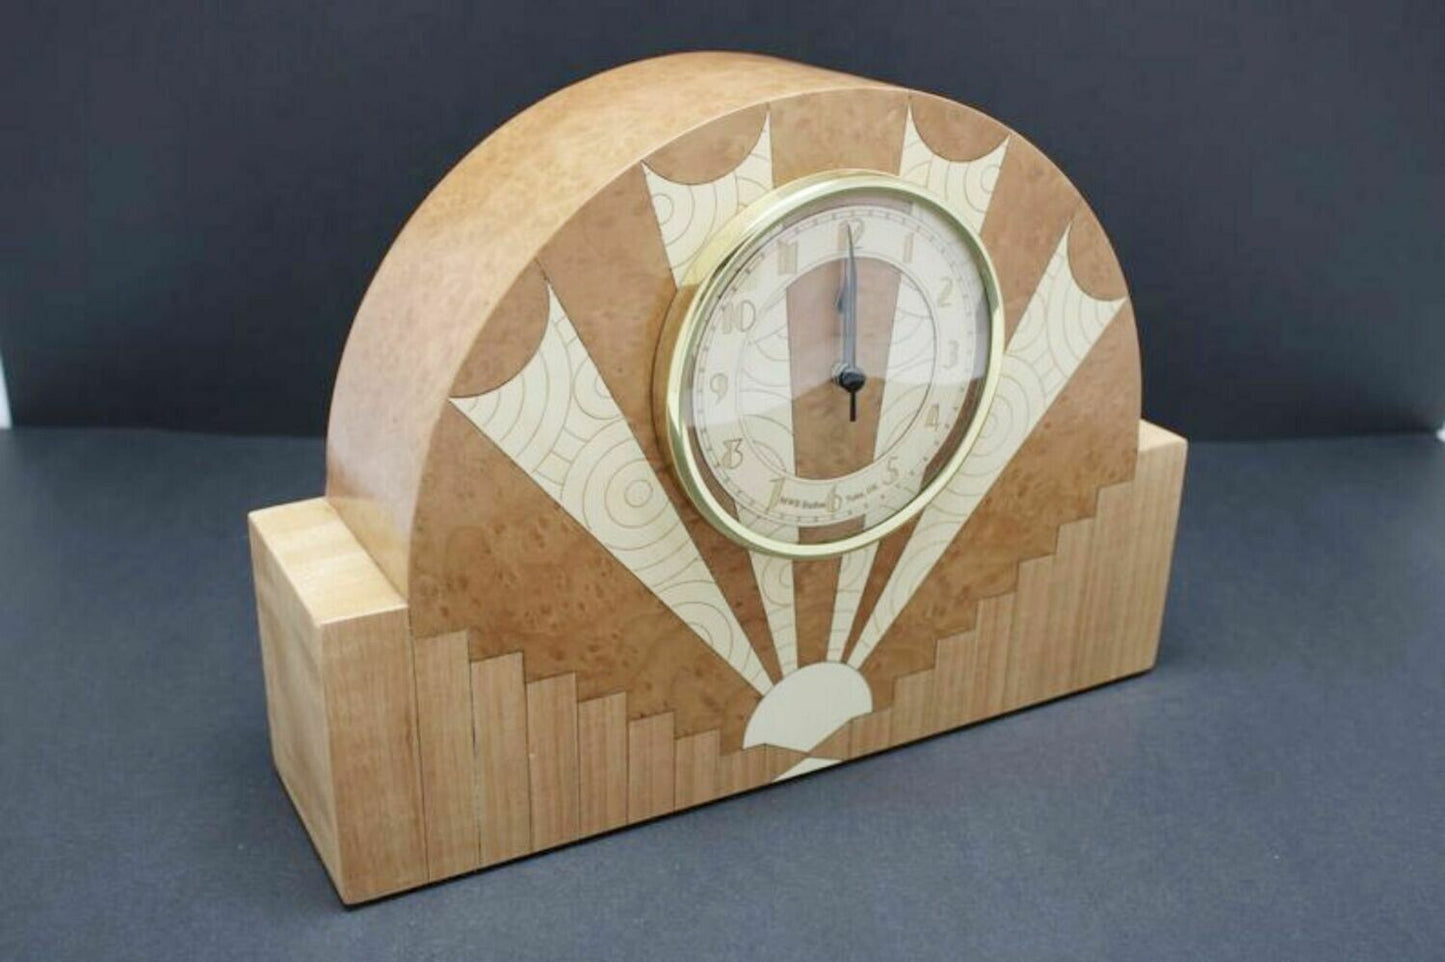 Handcrafted Mantle Clock - Art Deco  MC-45   Made in the U.S.